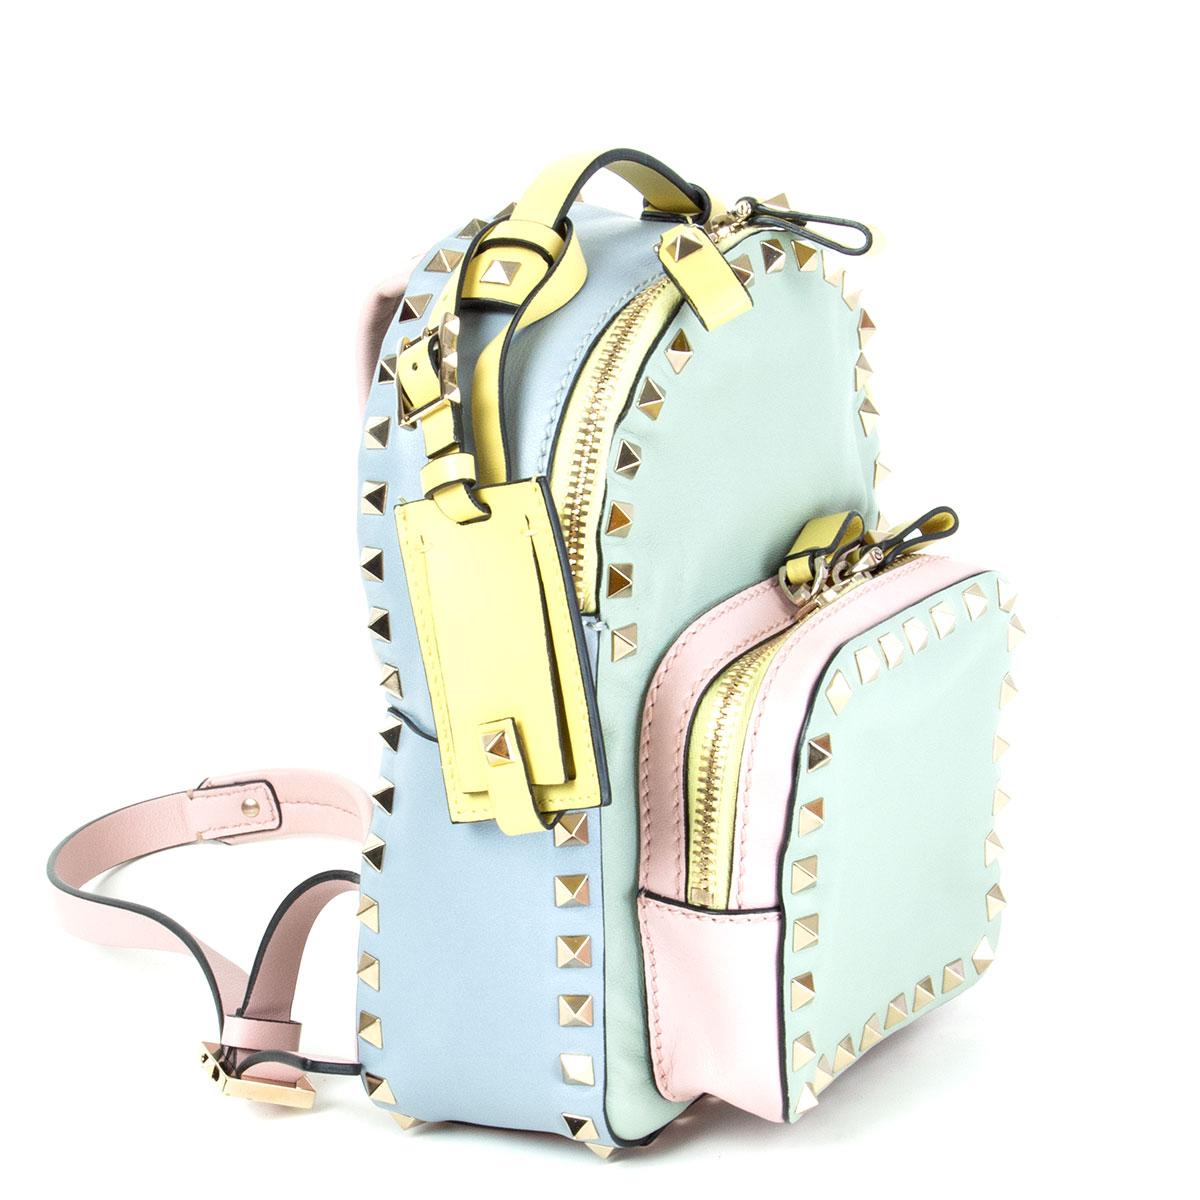 authentic Valentino Mini Rockstud Watercolor backpack in mint pastel, pink pastel, yellow pastel and blue pastel smooth lambskin featuring the signature light gold-tone pyramid studs. Has a zipped front pocket and two small slit pockets on the side.